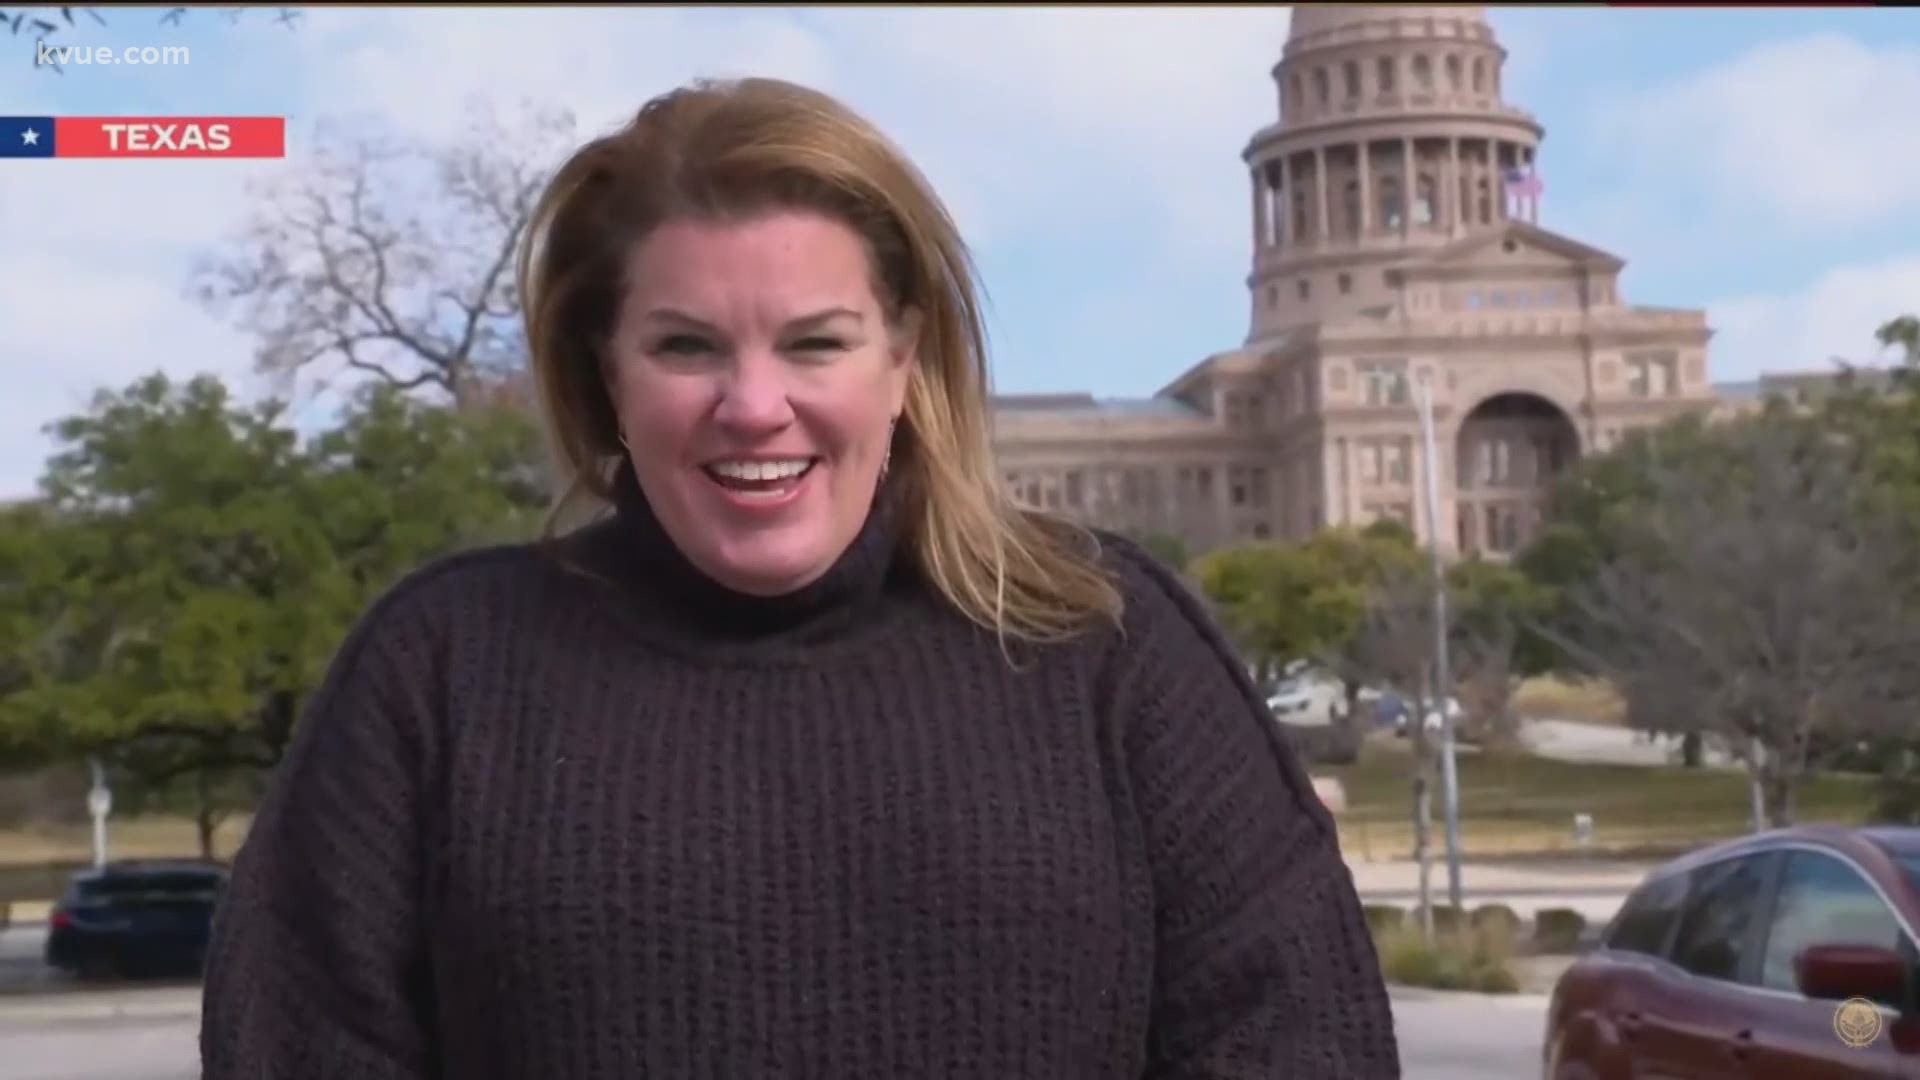 One Austin-area teacher was honored in the inaugural parade as one of the heroes next door. Meet Westlake High School's Cathy Cluck.